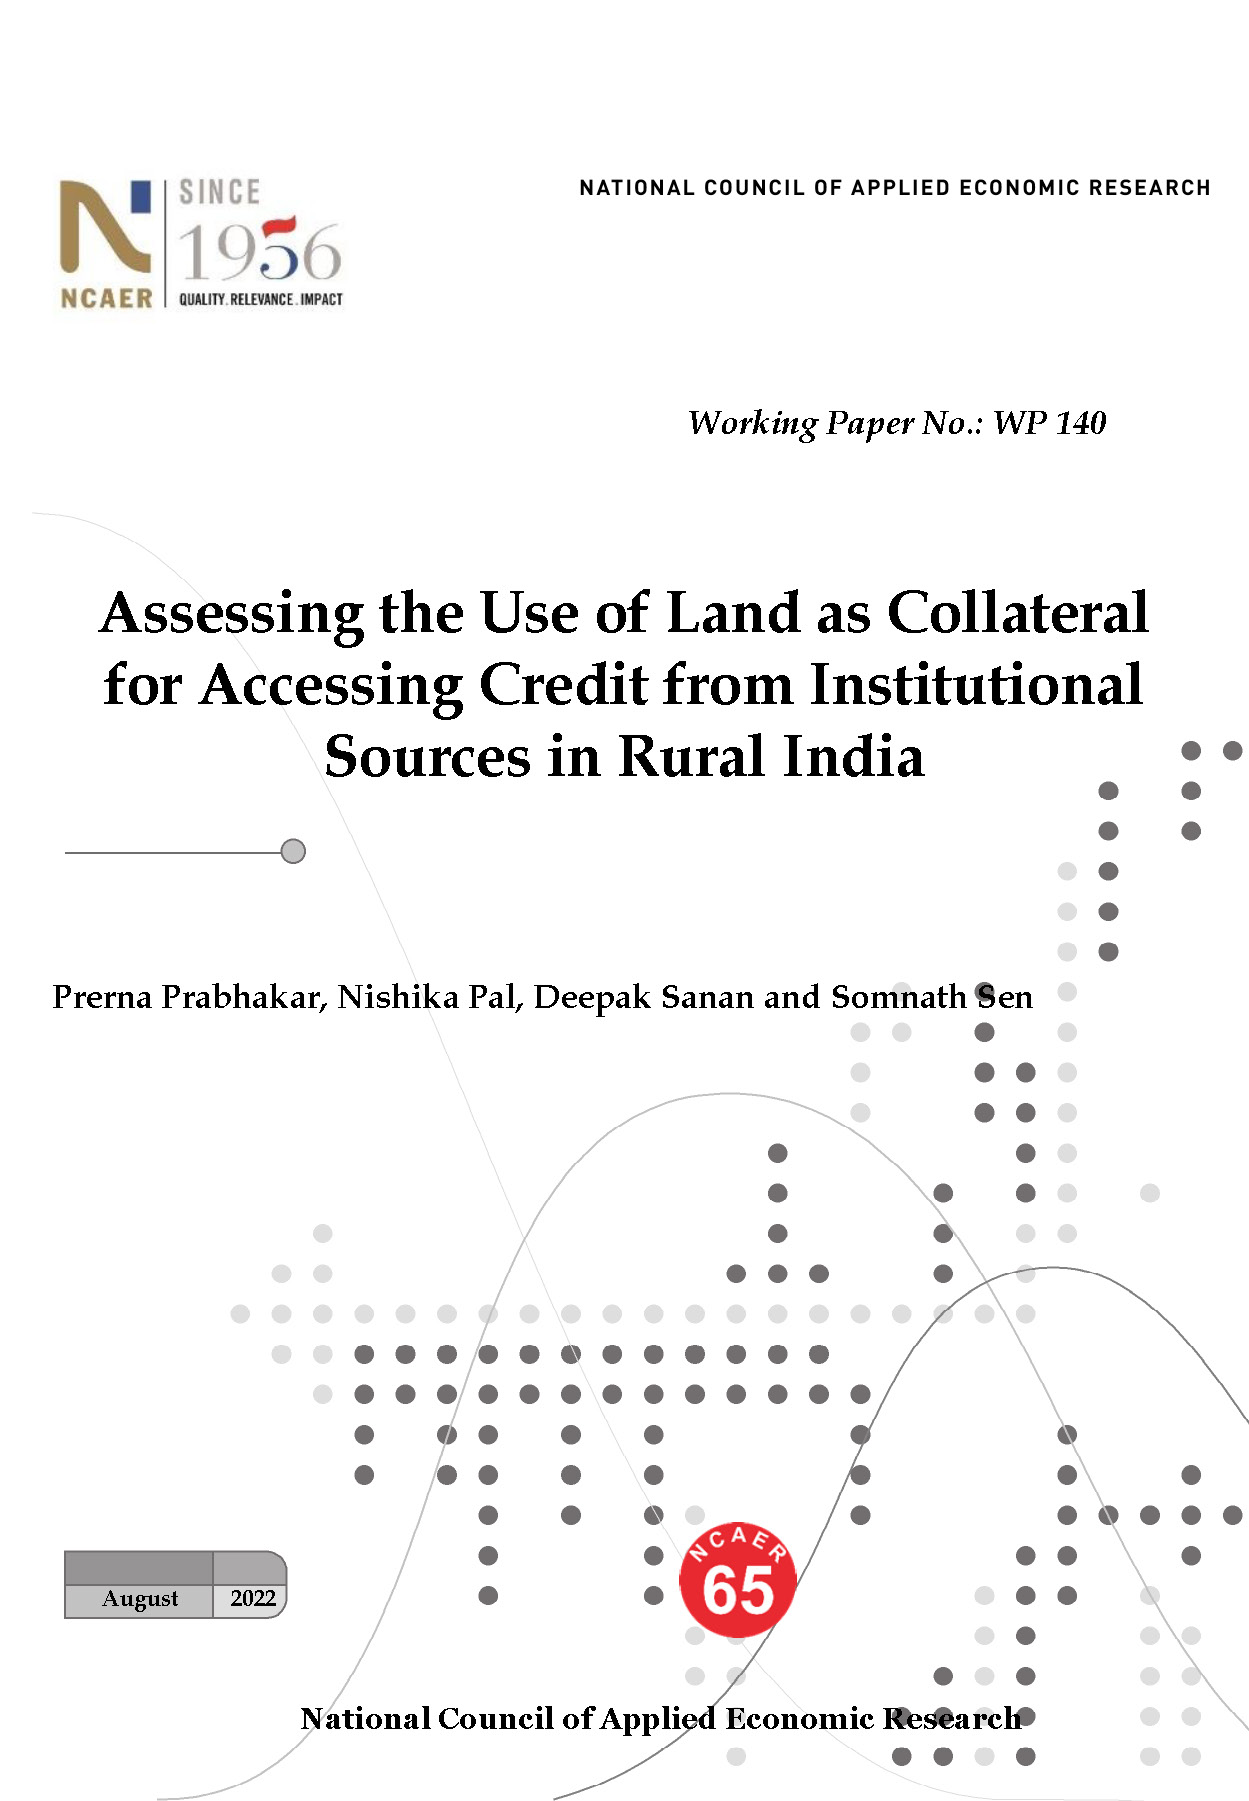 Assessing the Use of Land as Collateral for Accessing Credit from Institutional Sources in Rural India